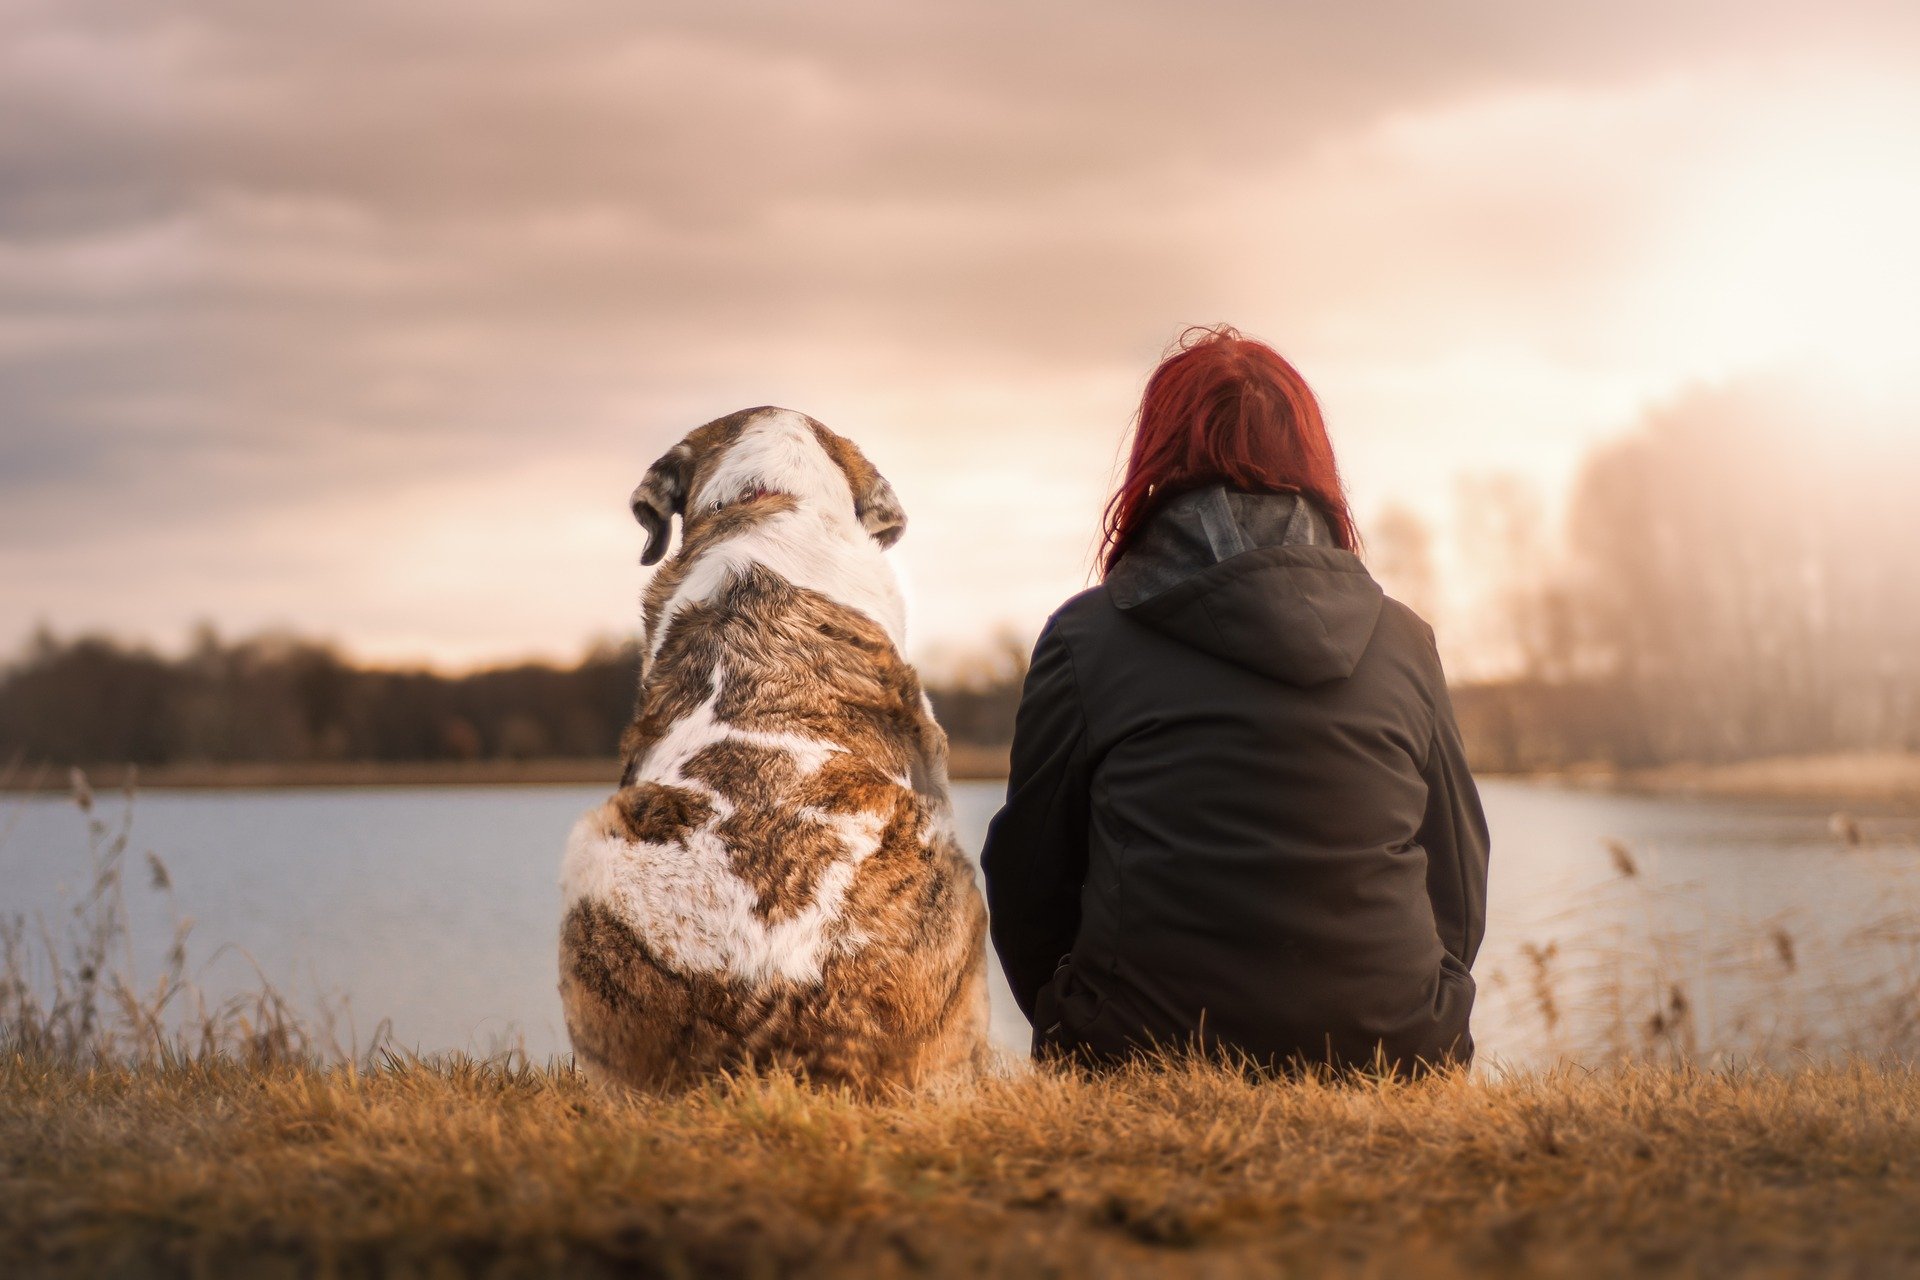 Image of a woman sat with a dog